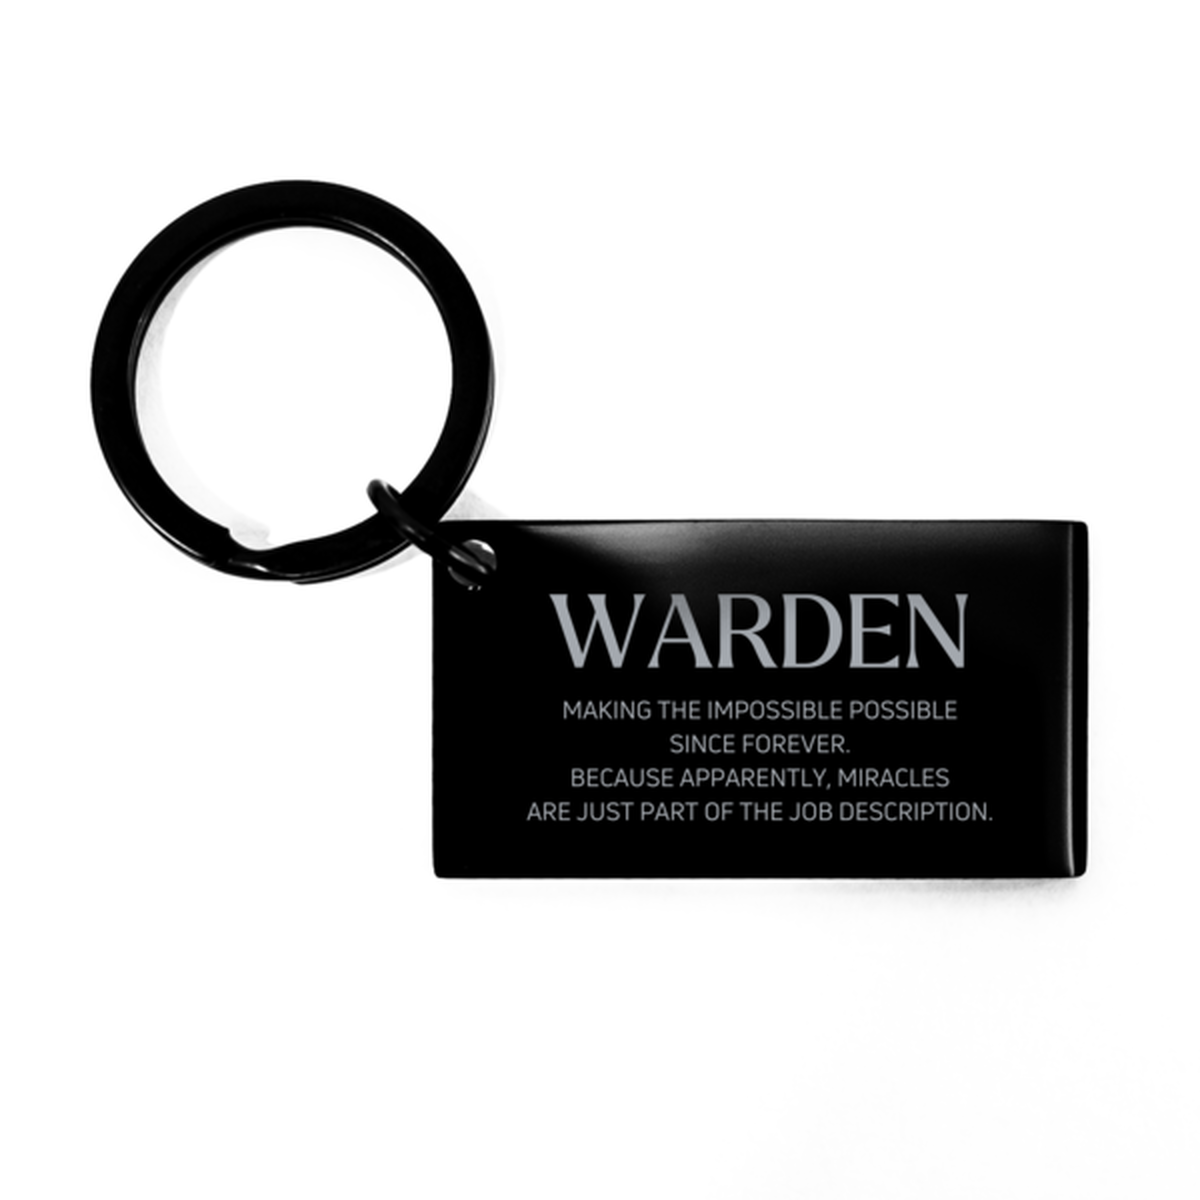 Funny Warden Gifts, Miracles are just part of the job description, Inspirational Birthday Keychain For Warden, Men, Women, Coworkers, Friends, Boss